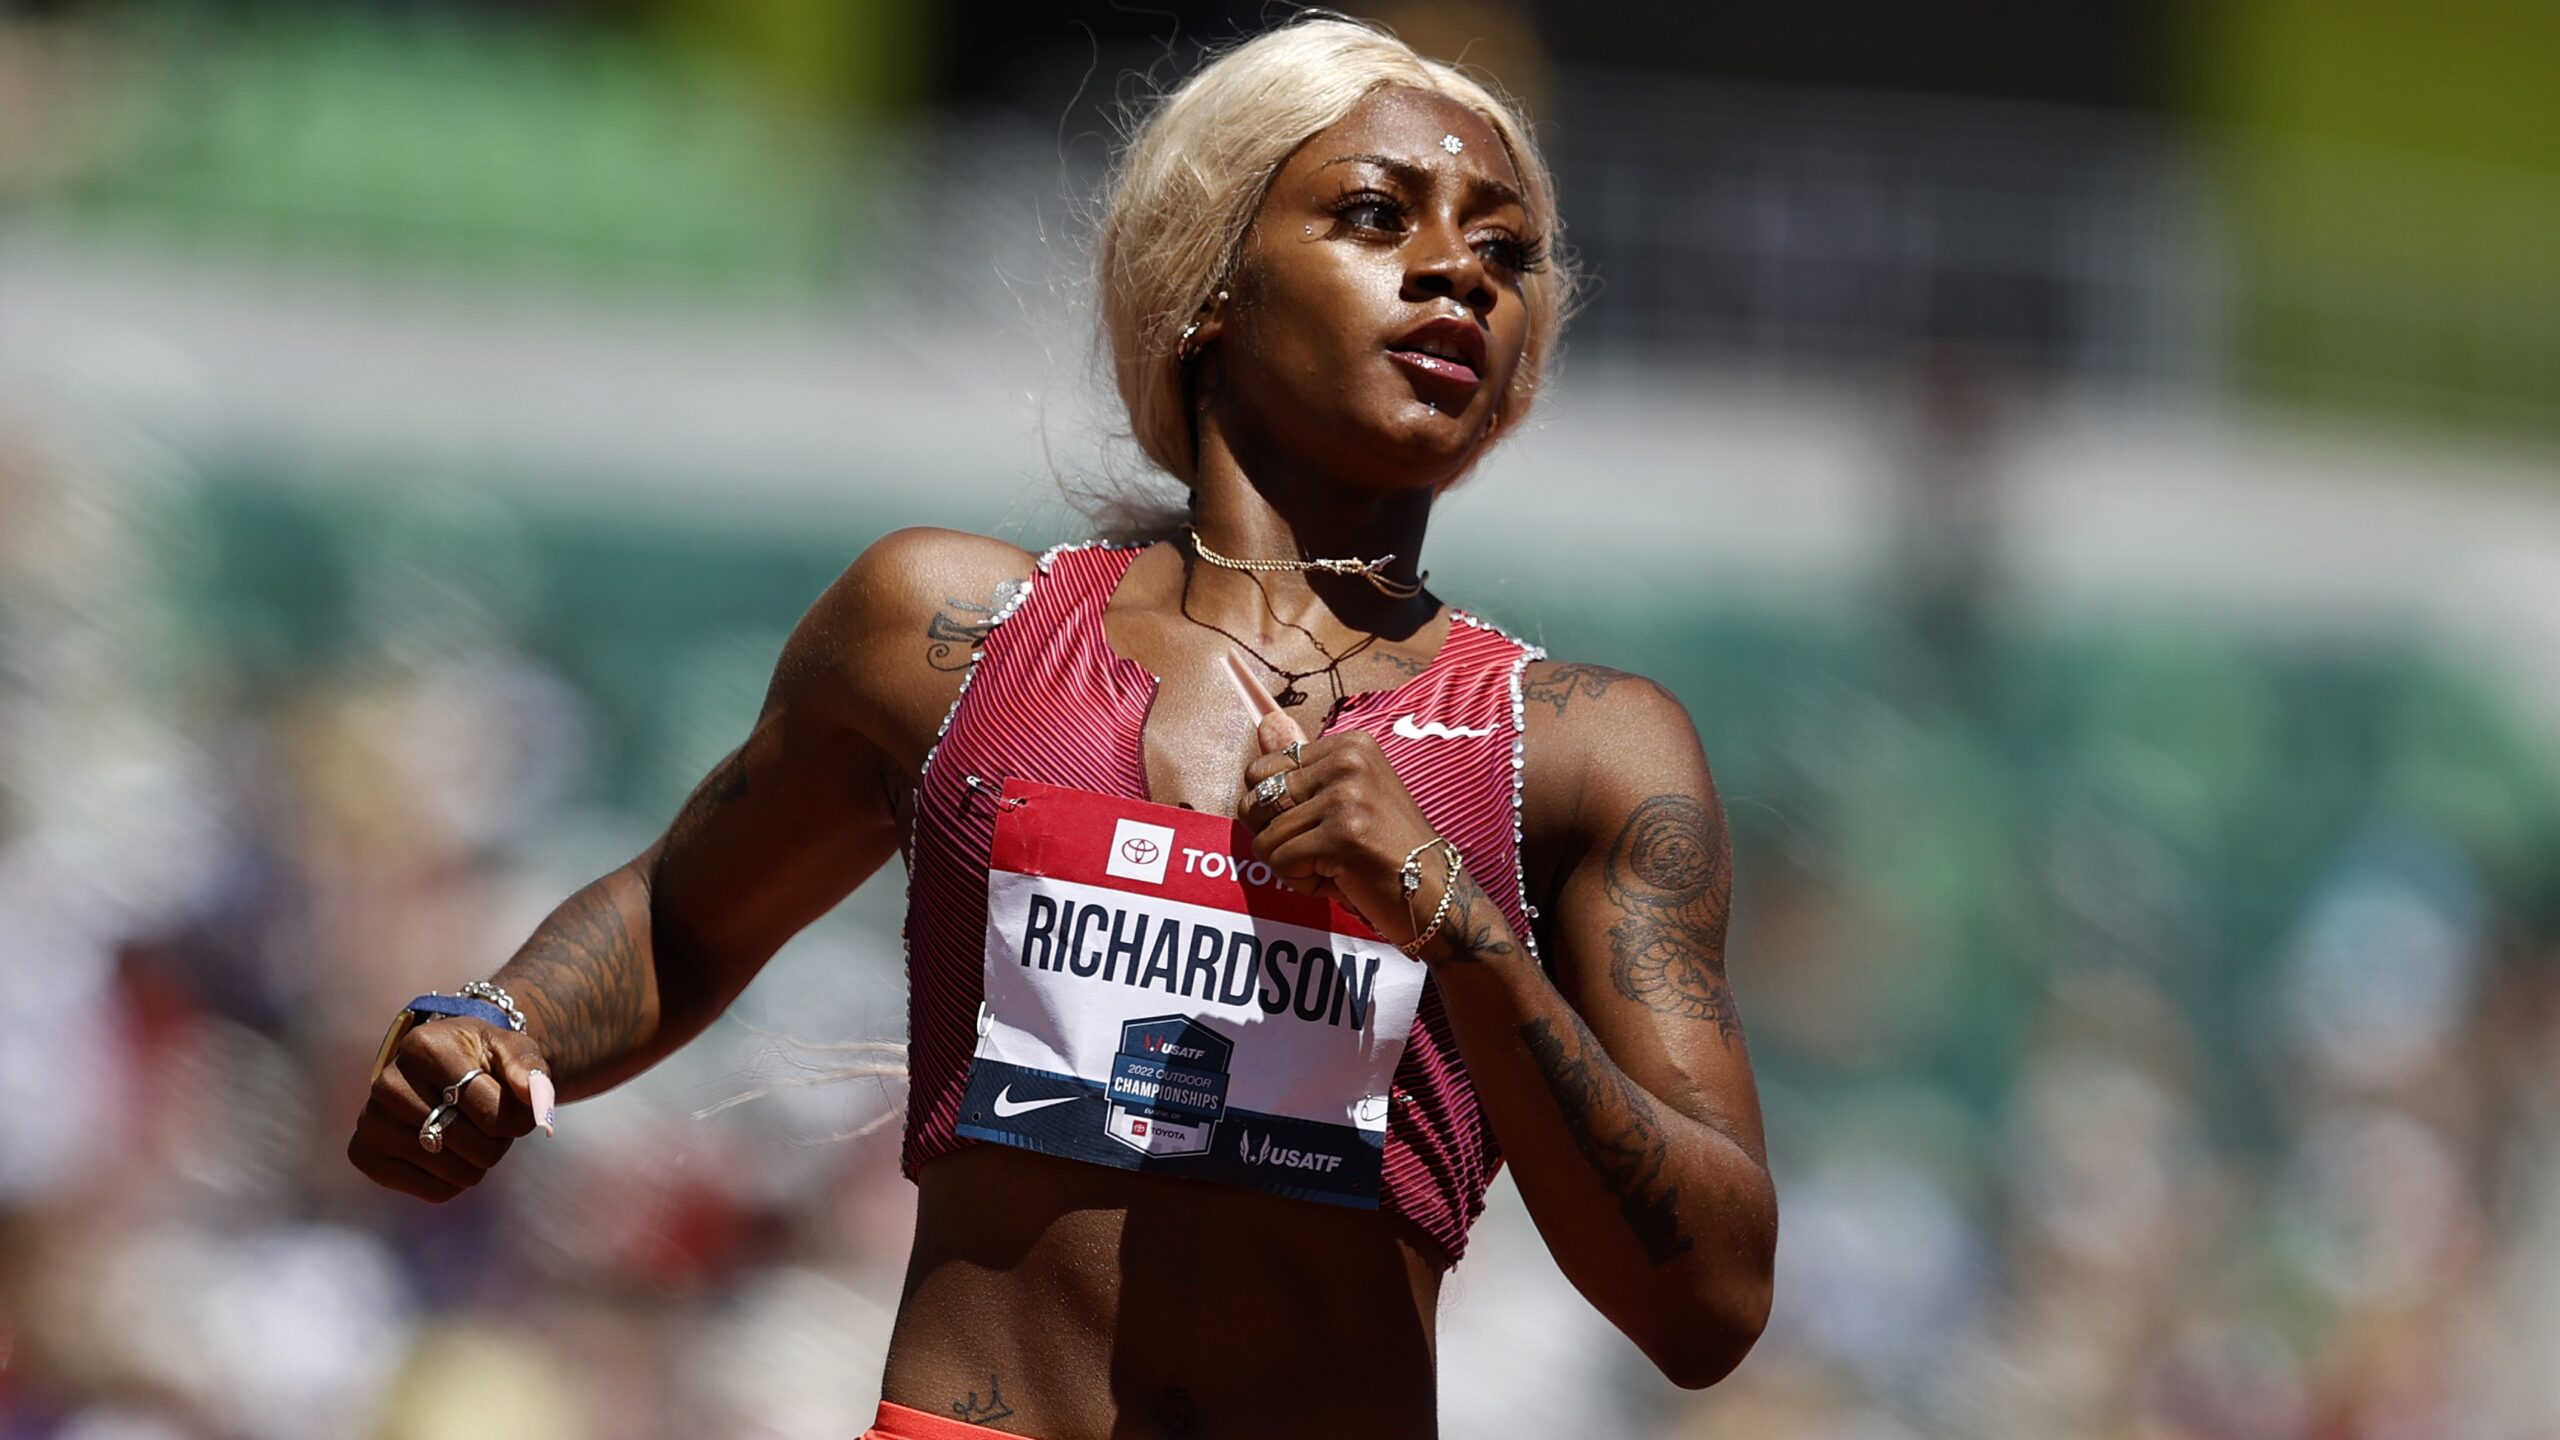 Sha’Carri Richardson Arrives In First At 100-Meter Race, Defeating Elaine Thompson-Herah